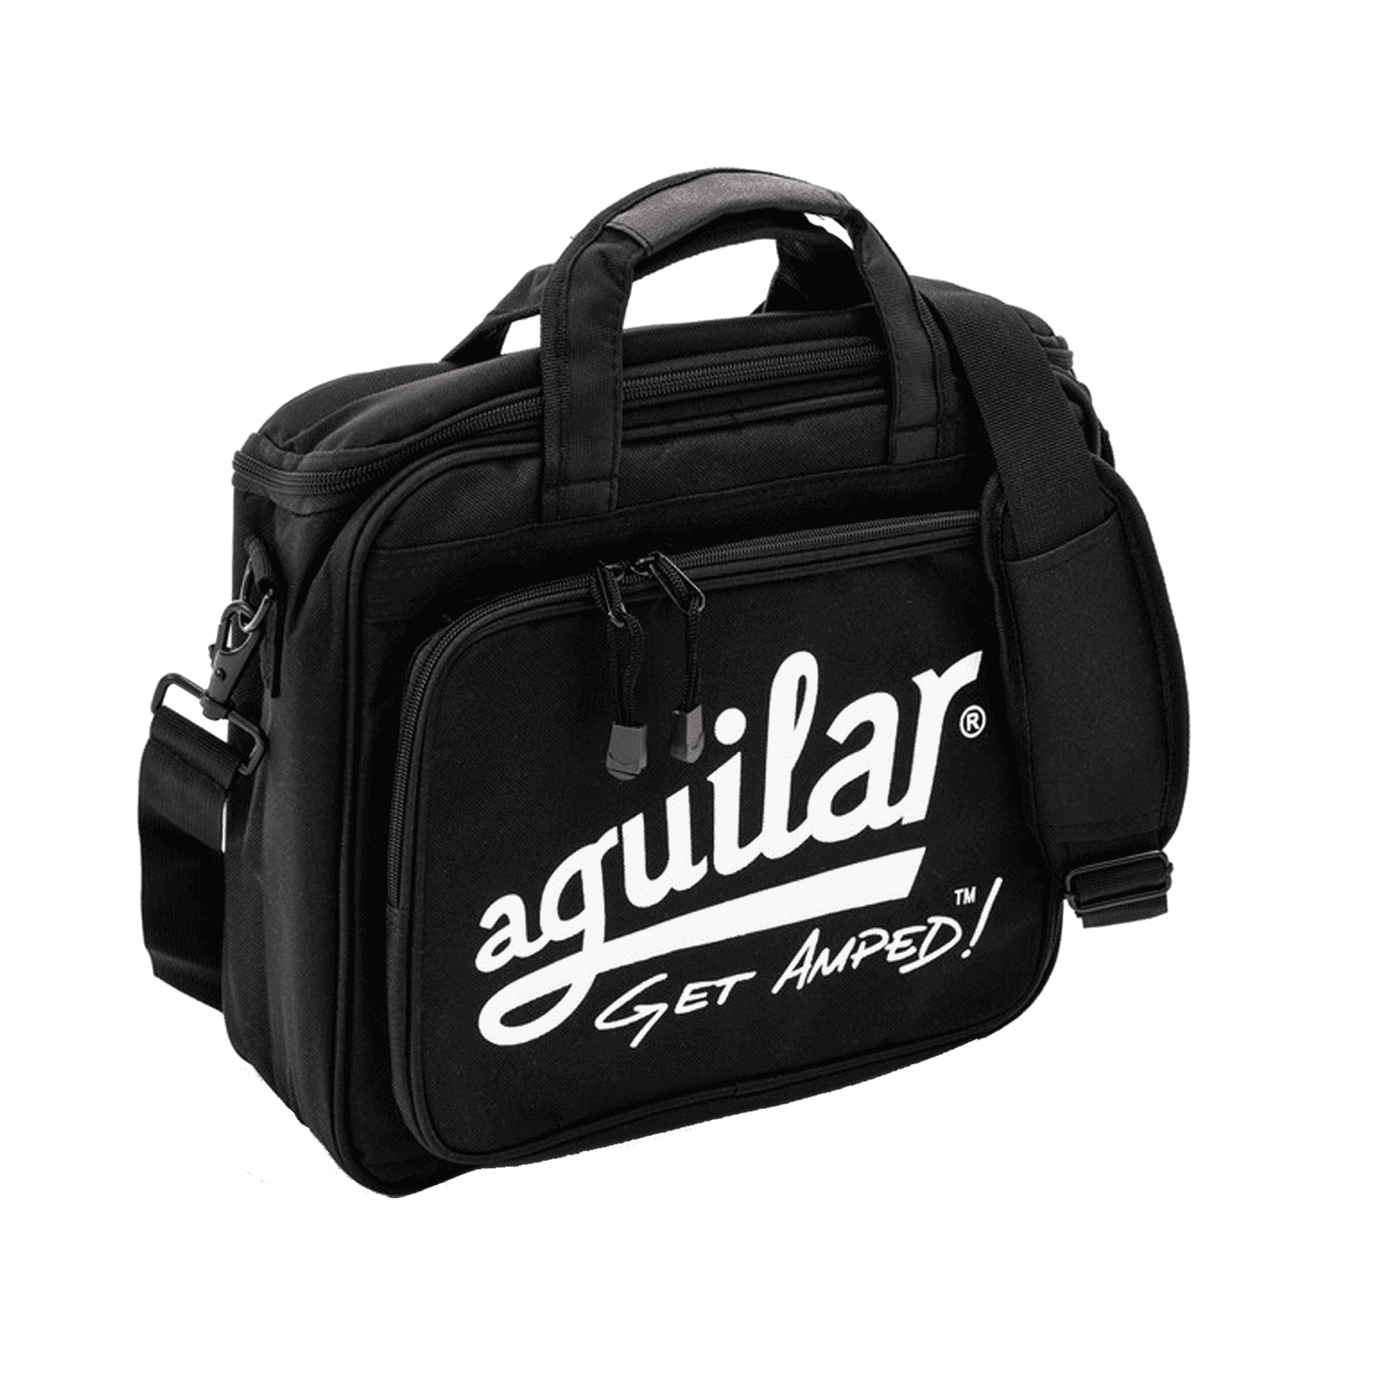 Funda Aguilar Tone Hammer 700 / AG 700 - This padded carrying bag is the perfect fit for the AG 700 or Tone Hammer 700. The side pocket is big enough to fit cables, tuner, or other small accessory items. A detachable shoulder strap makes the bag even easi